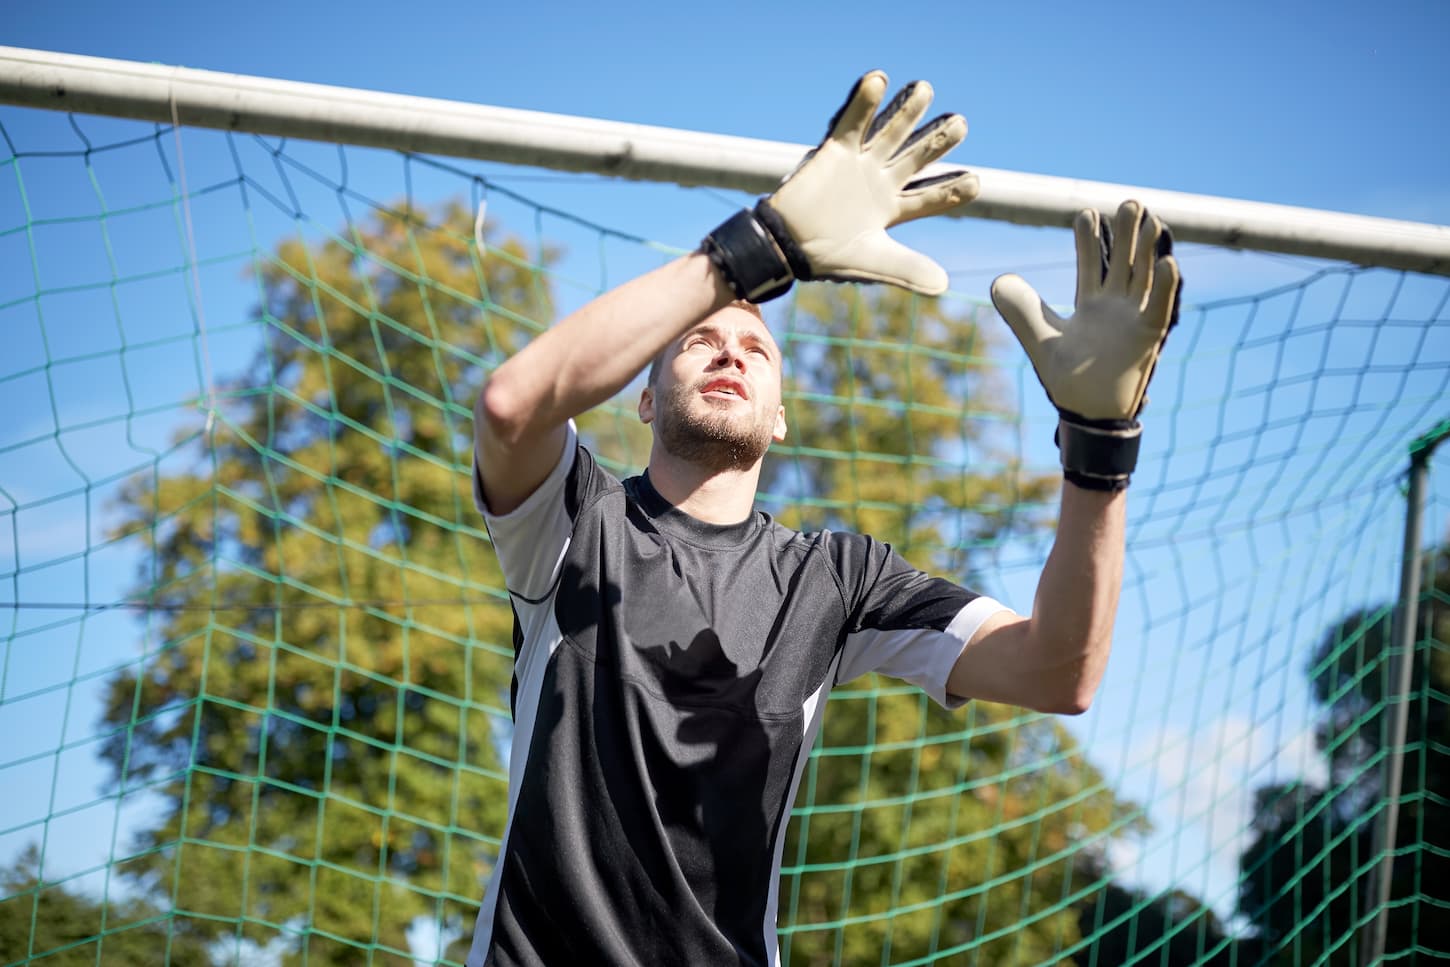 An image of a goalkeeper or soccer player at a football goal.